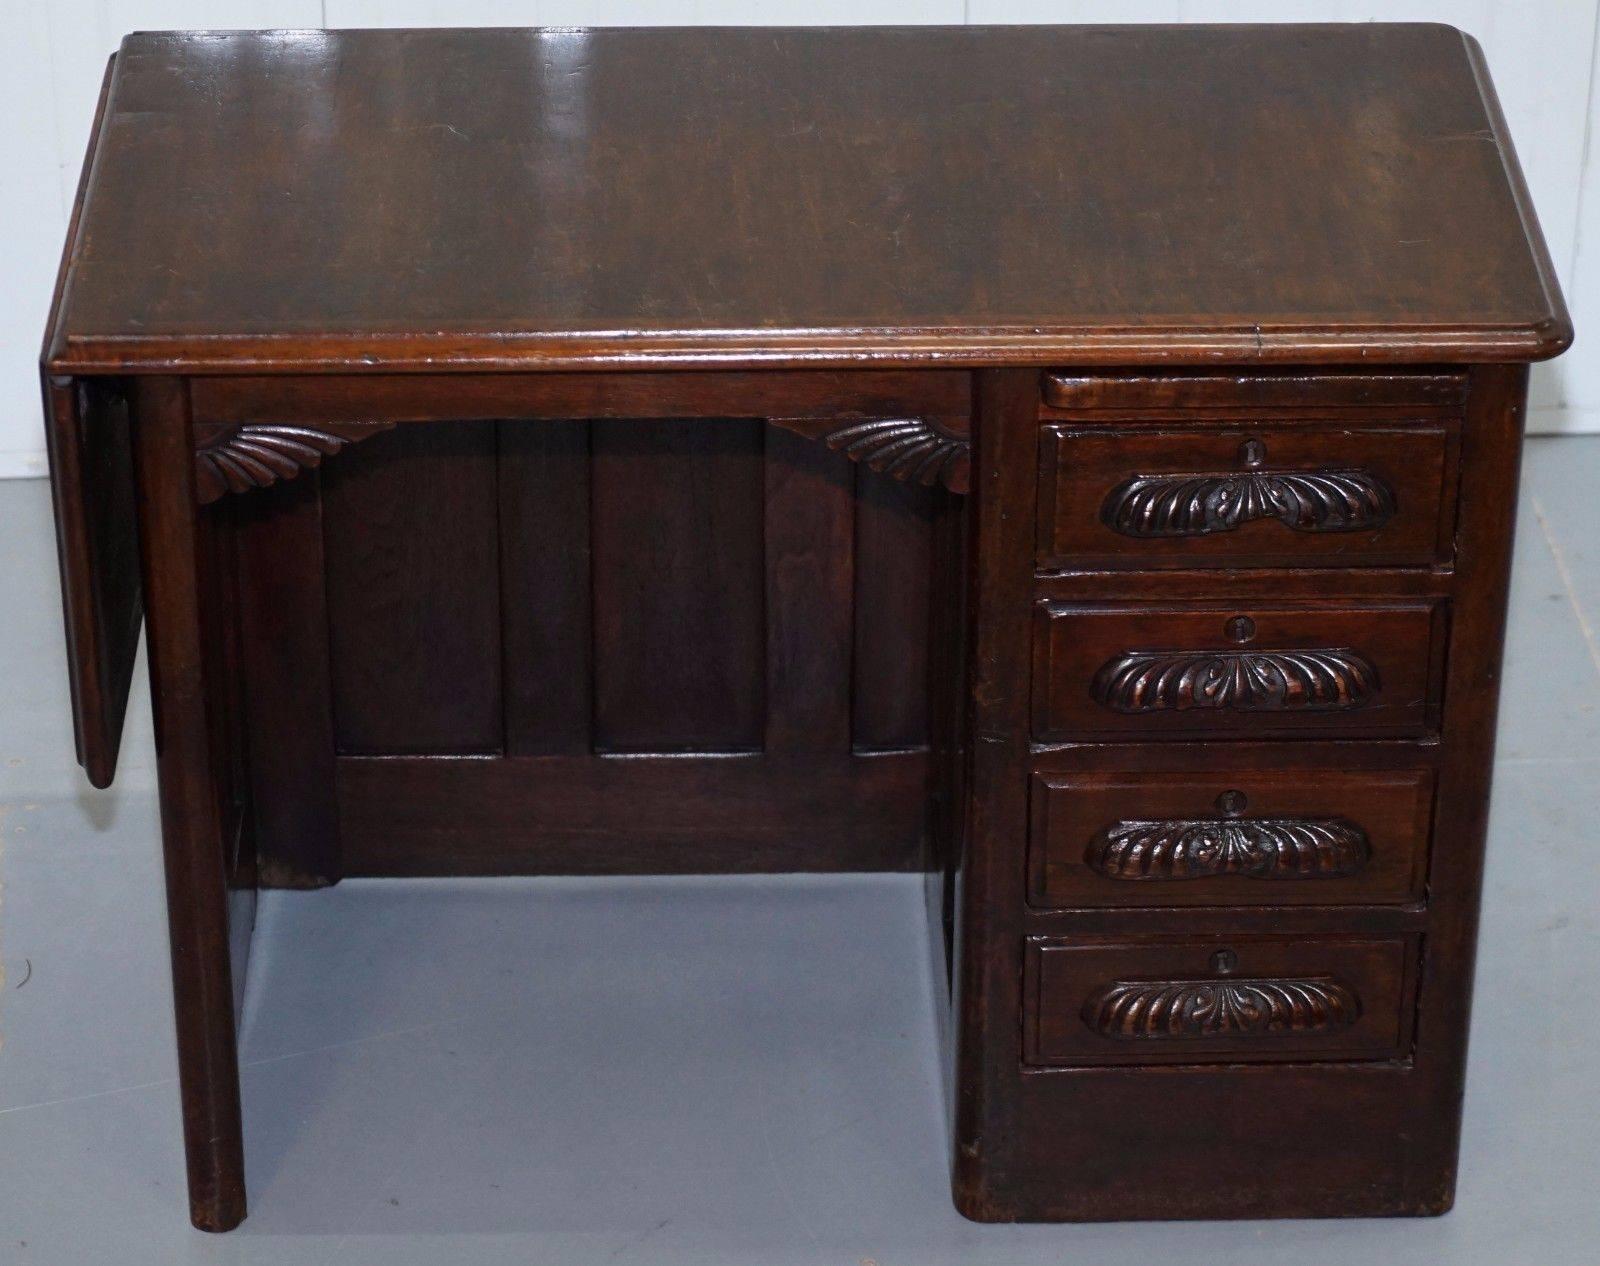 We are delighted to offer for sale this lovely Edwardian solid oak children’s desk

The carpenter who made this desk must have had a time machine, its compact so ideal for modern life, it has a pop up extra leaf so can be shared with another